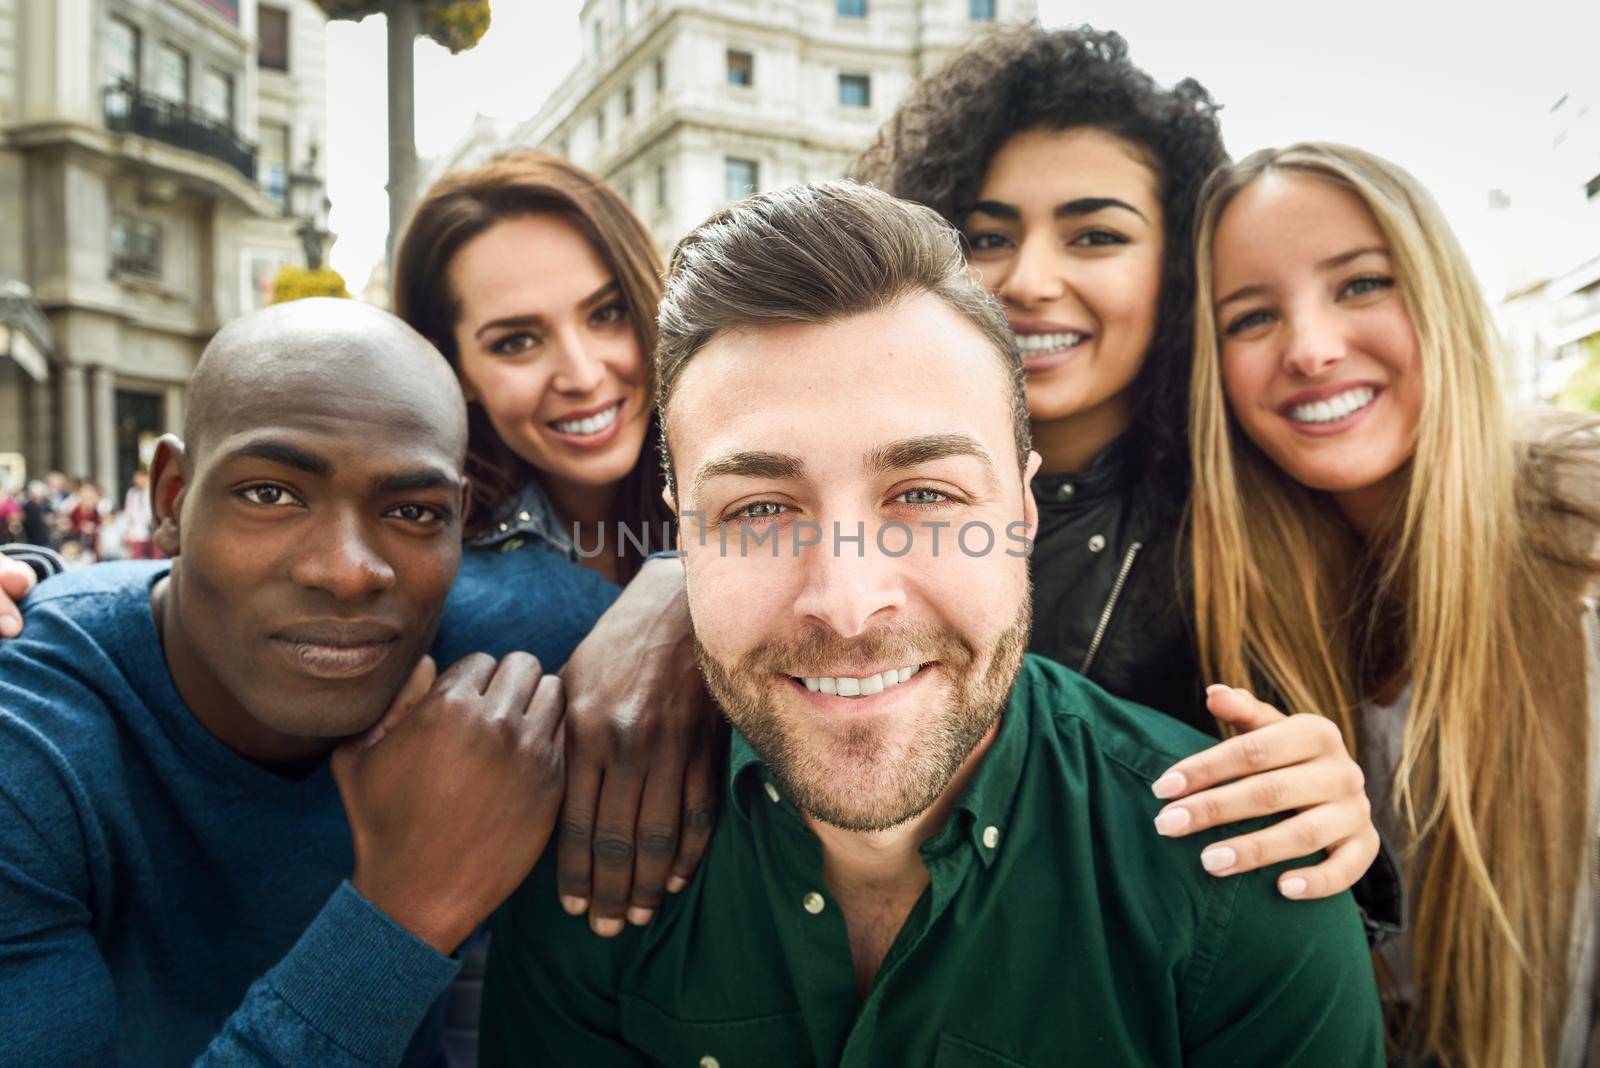 Multiracial group of friends taking selfie in a urban street with a caucasian man in foreground. Three young women and two men wearing casual clothes.